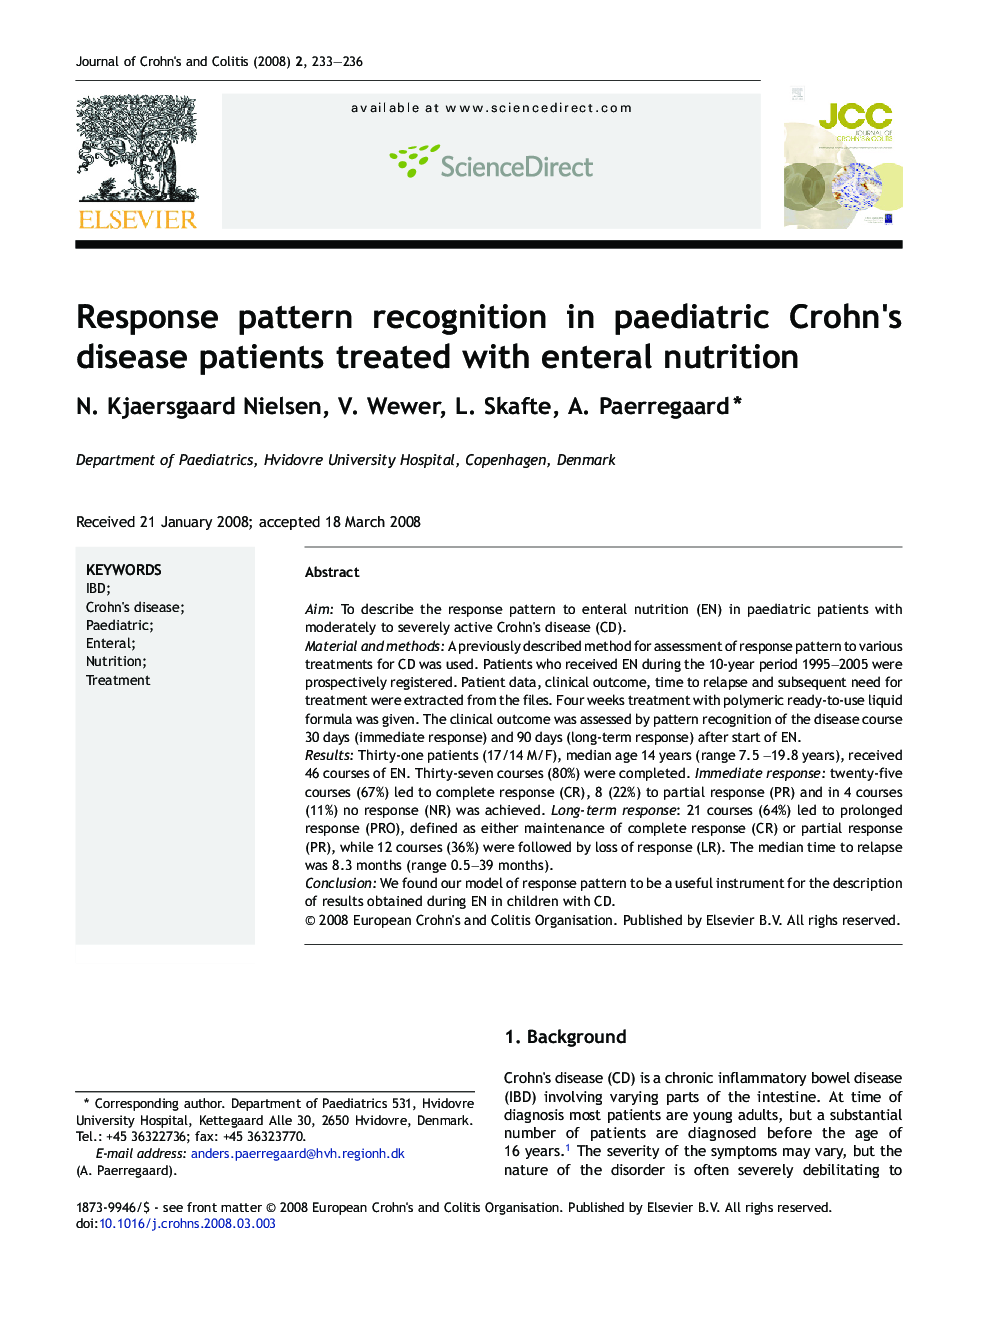 Response pattern recognition in paediatric Crohn's disease patients treated with enteral nutrition